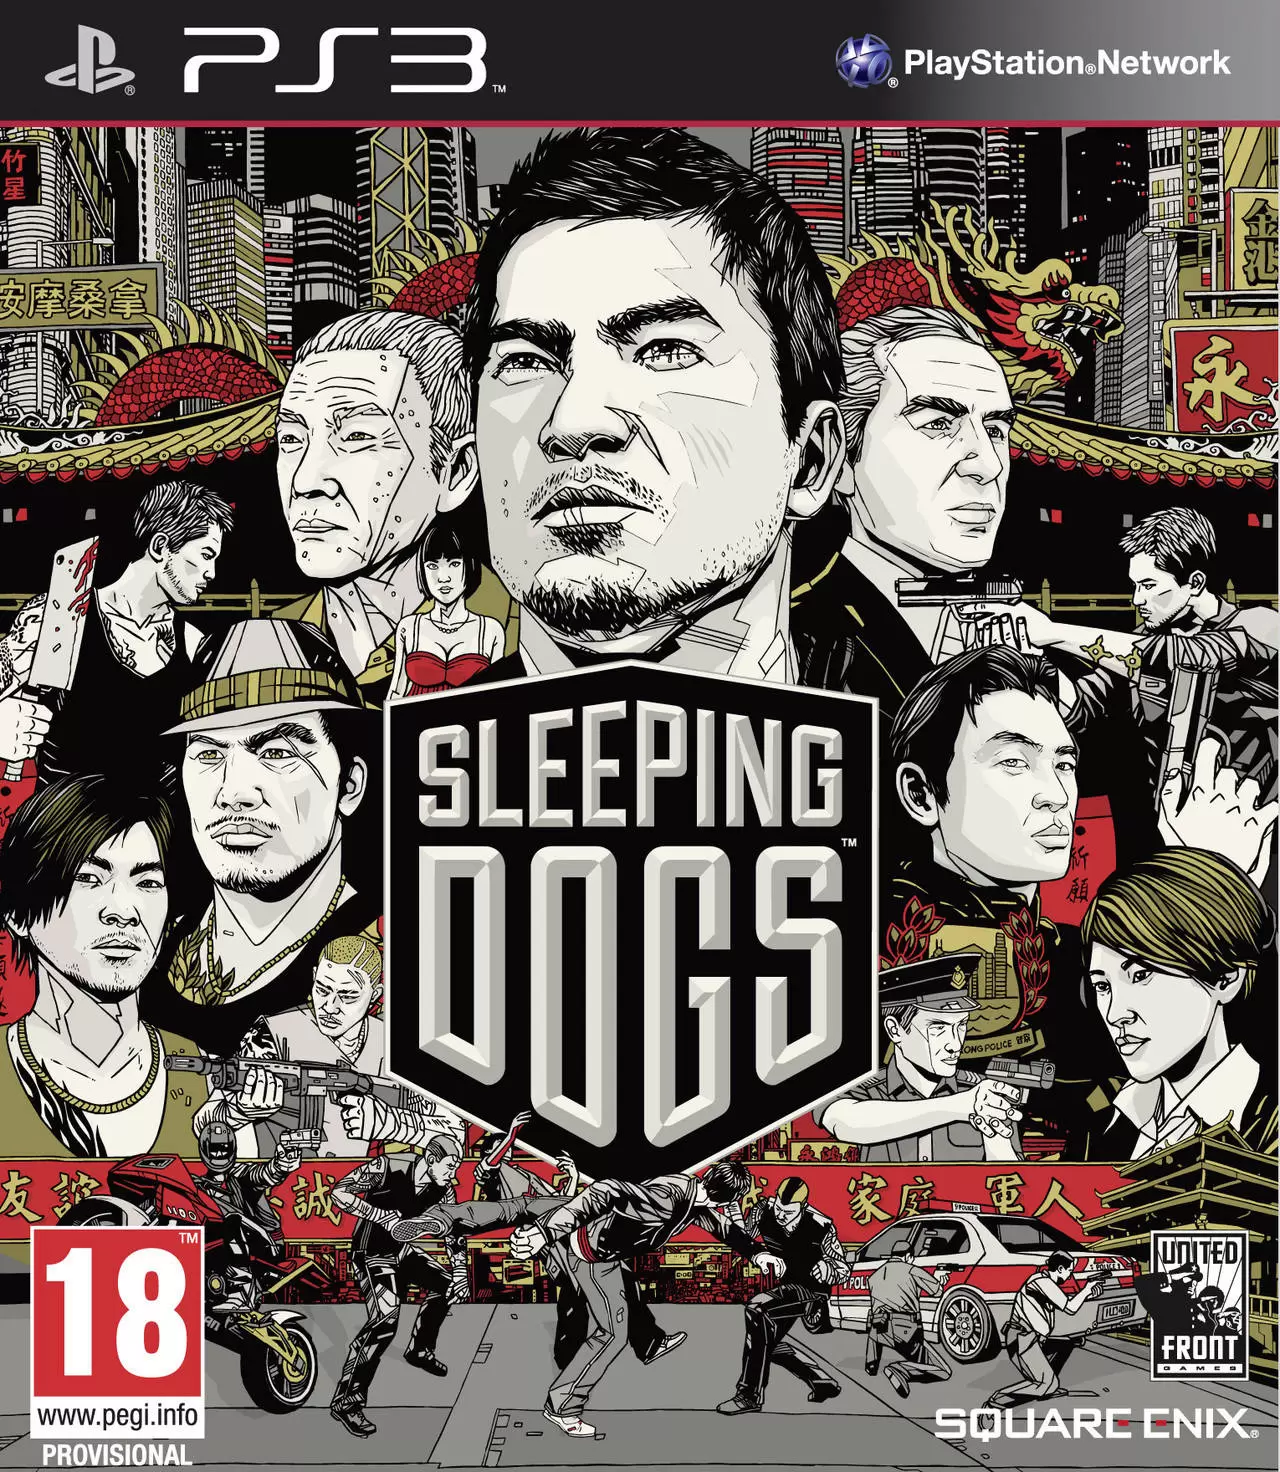 PS3 Games - Sleeping Dogs